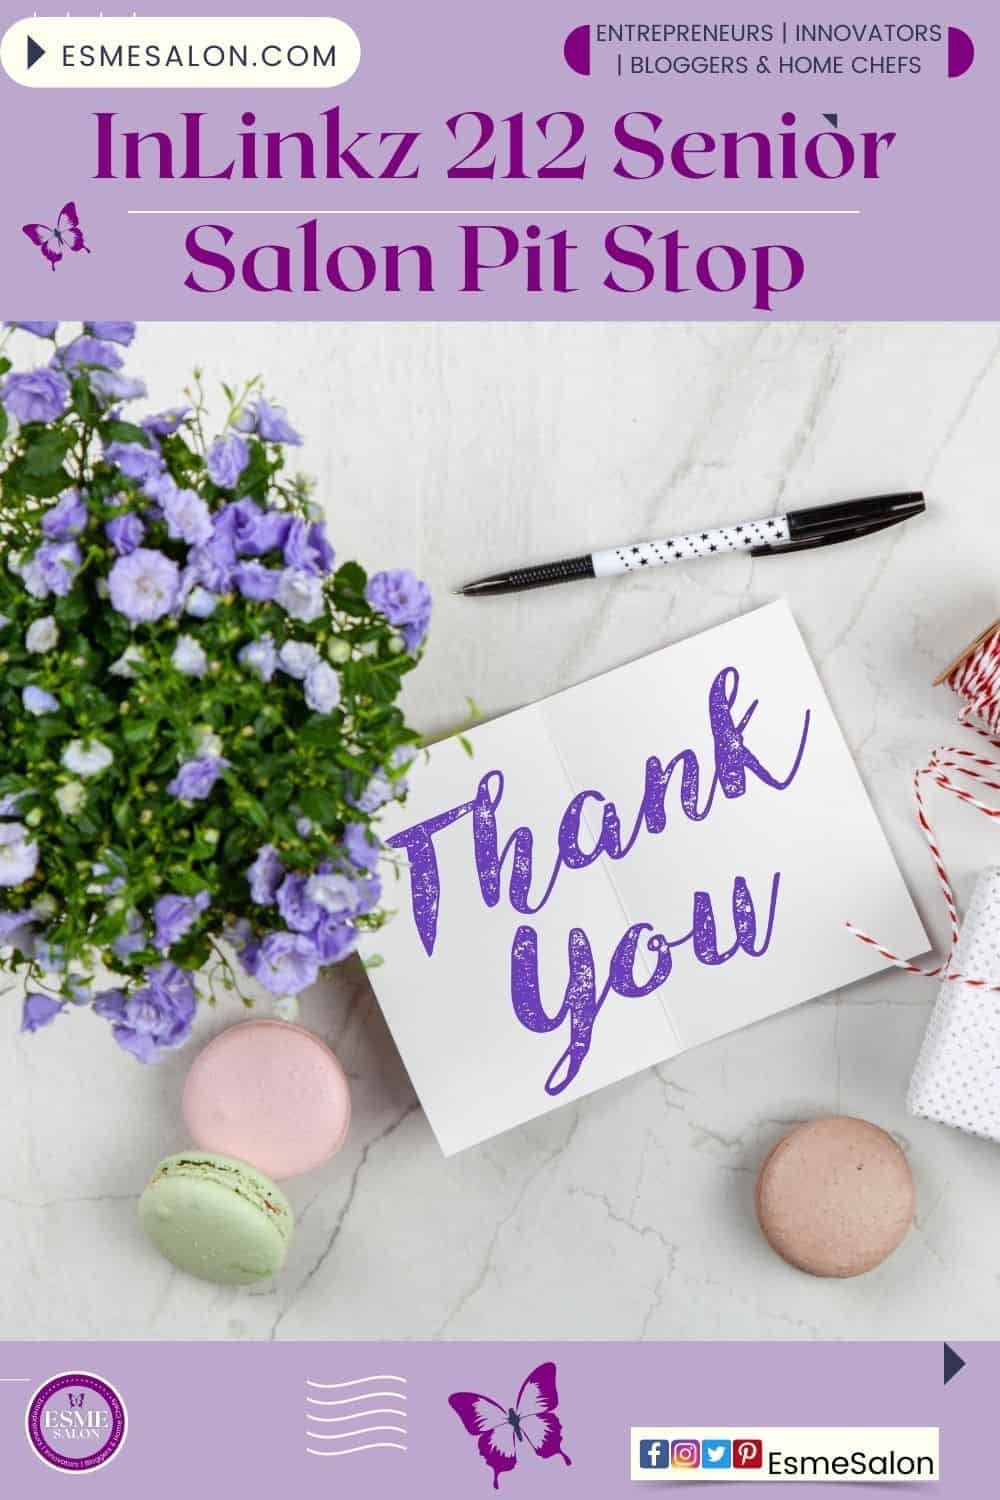 An image with a bowl of lilac flowers and greenery and a thank you card